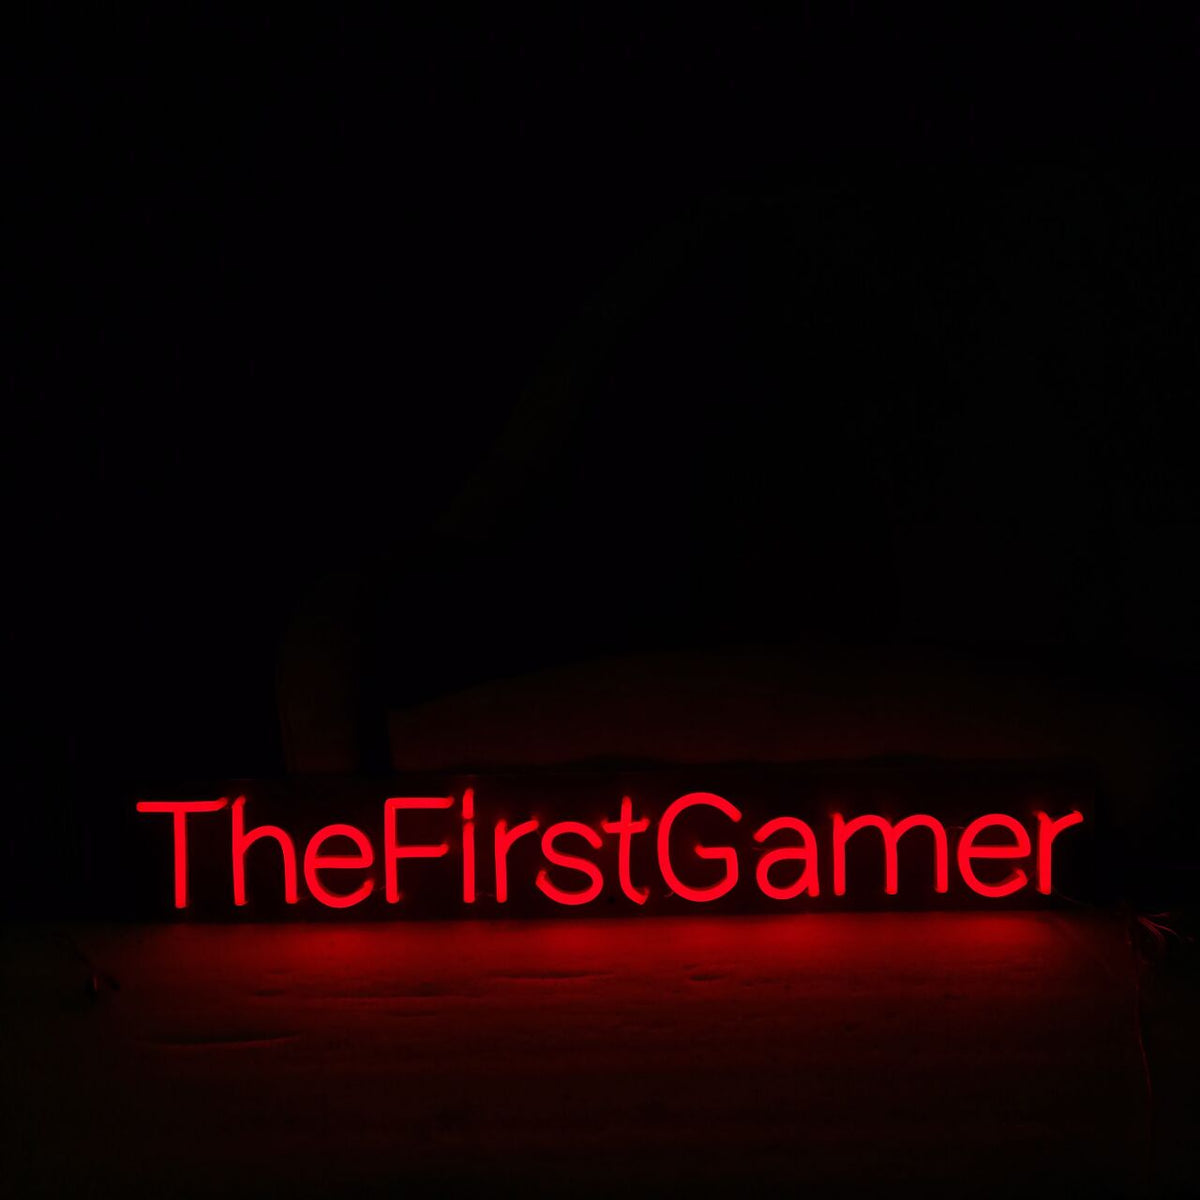 &quot;TheFirstGamer&quot; Neon Led Sign